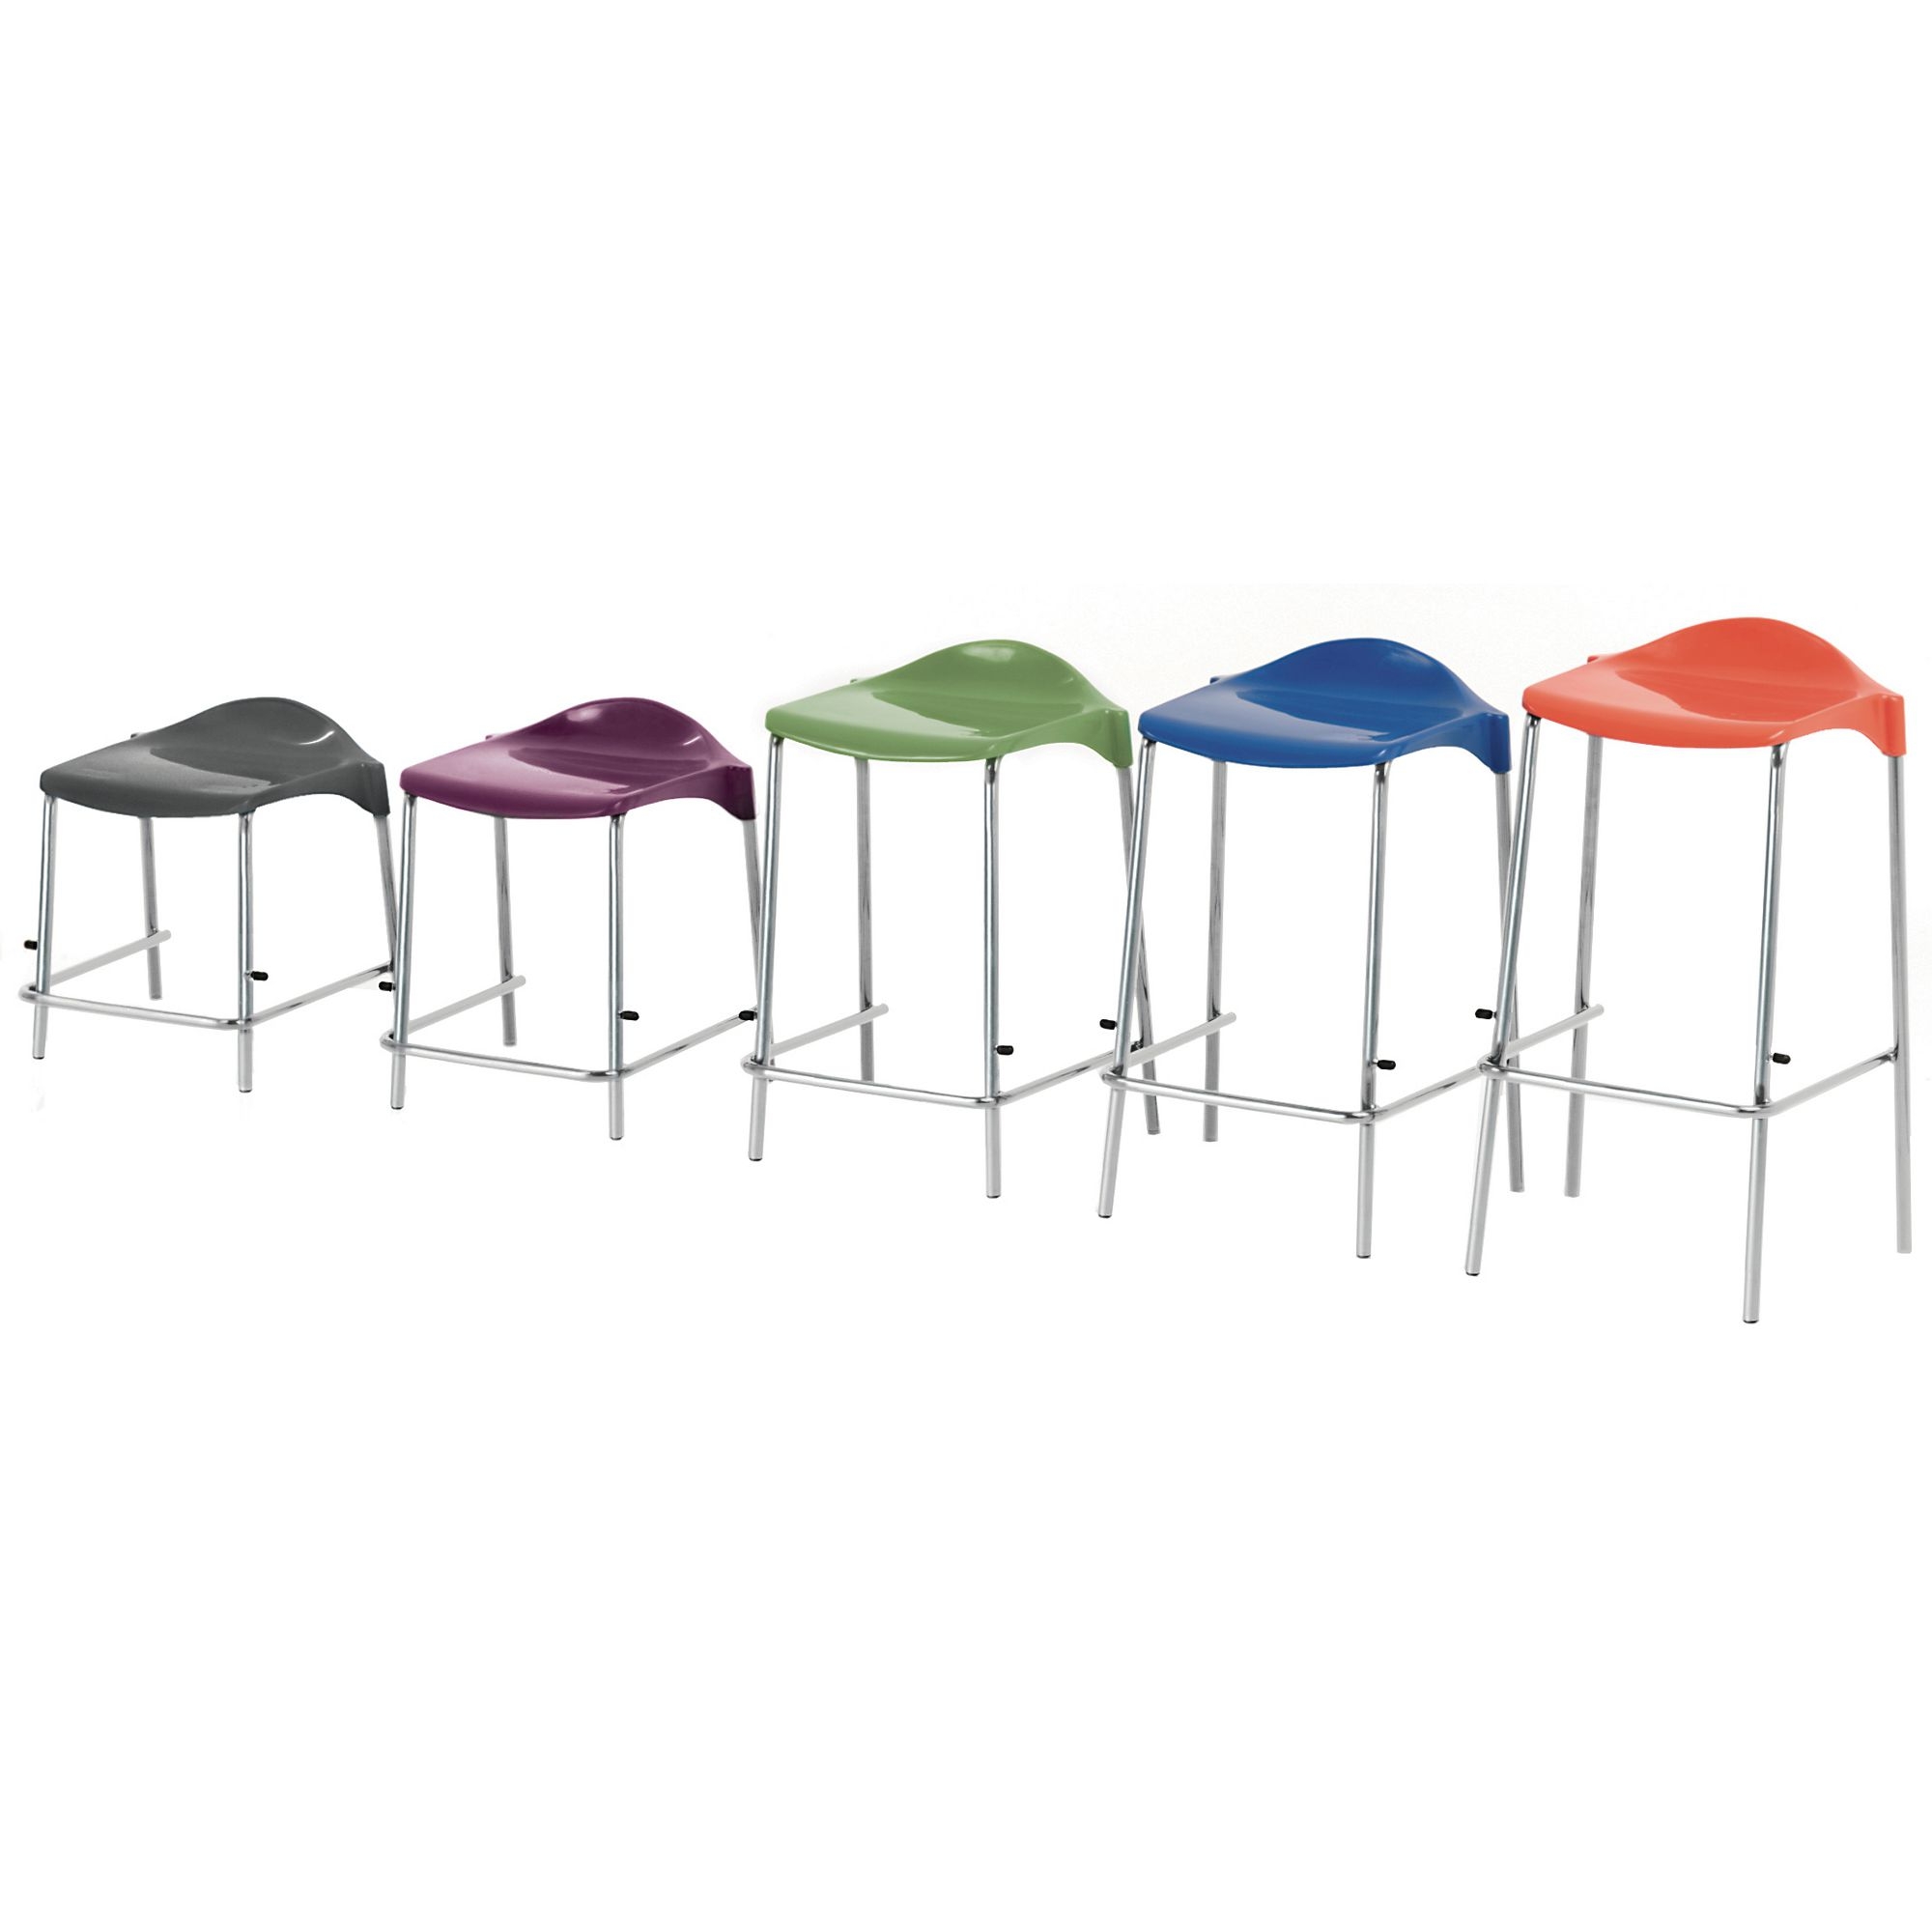 WSM four Legged Stool - Seat height: 560mm - Lime